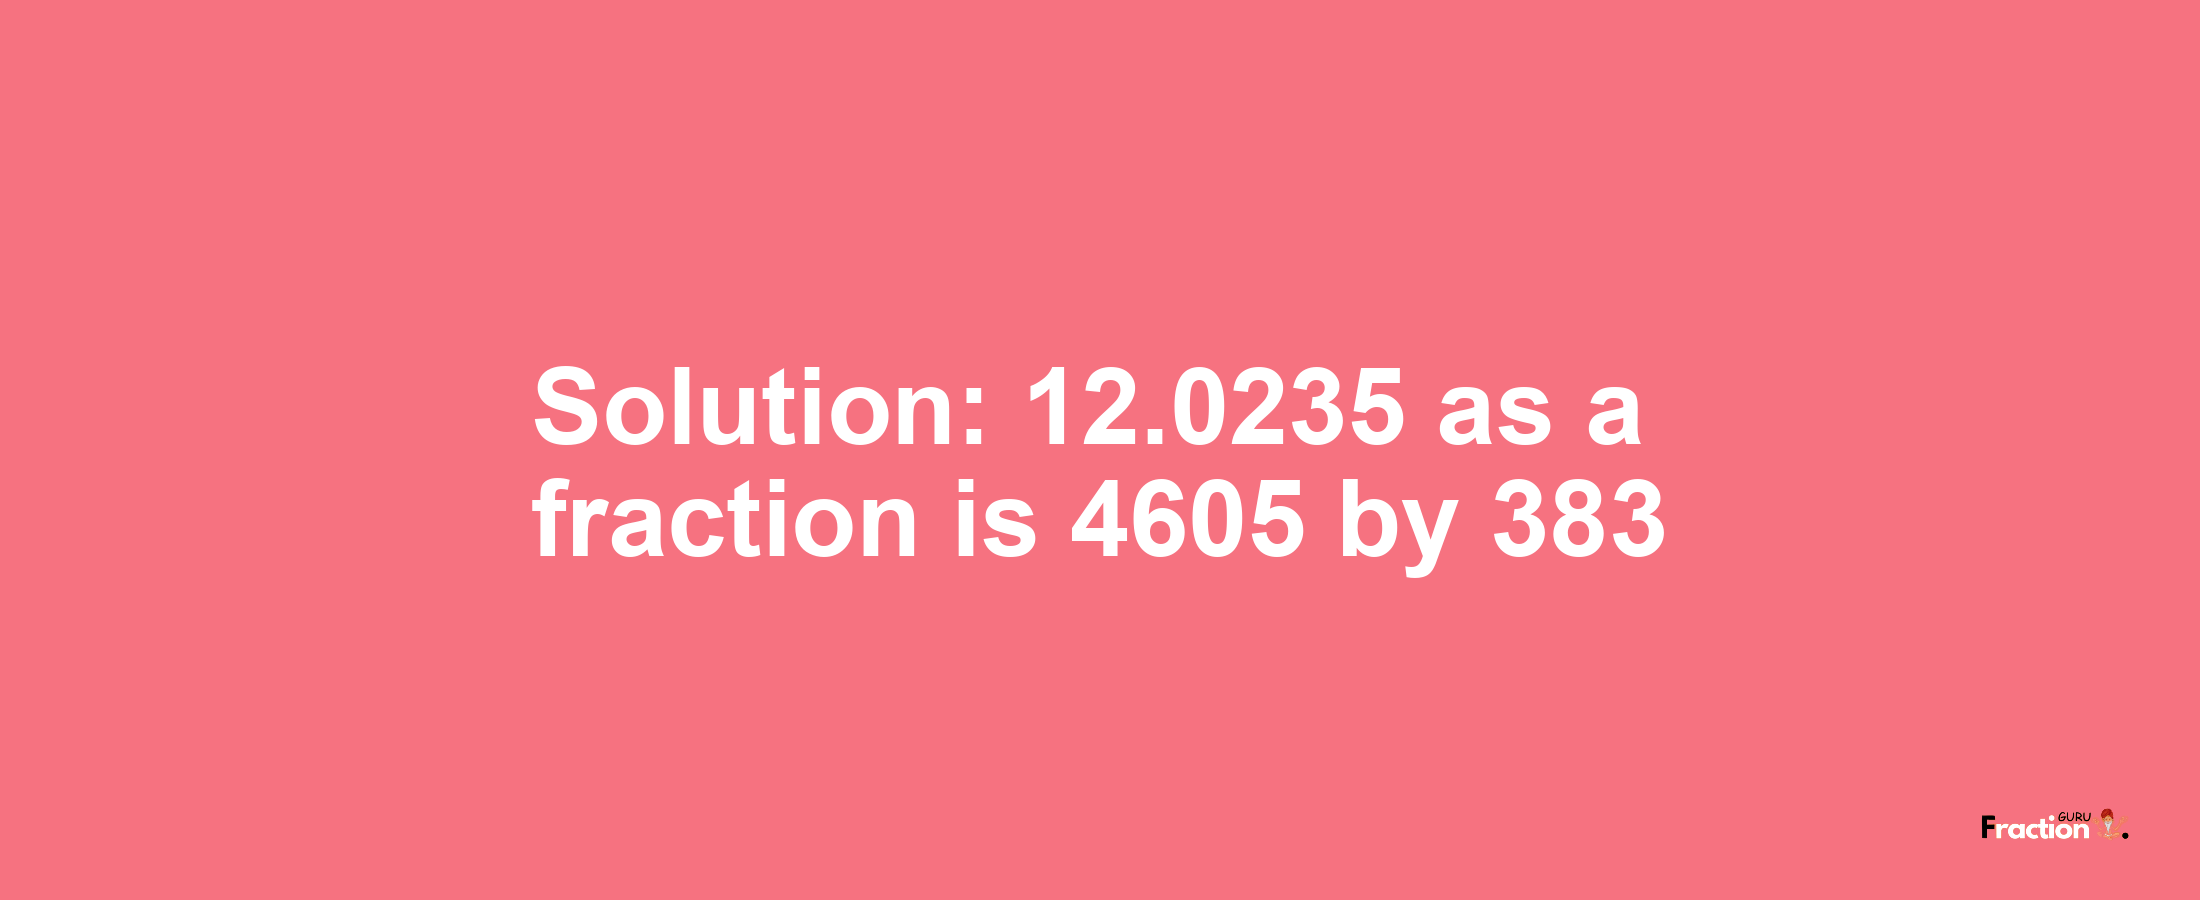 Solution:12.0235 as a fraction is 4605/383